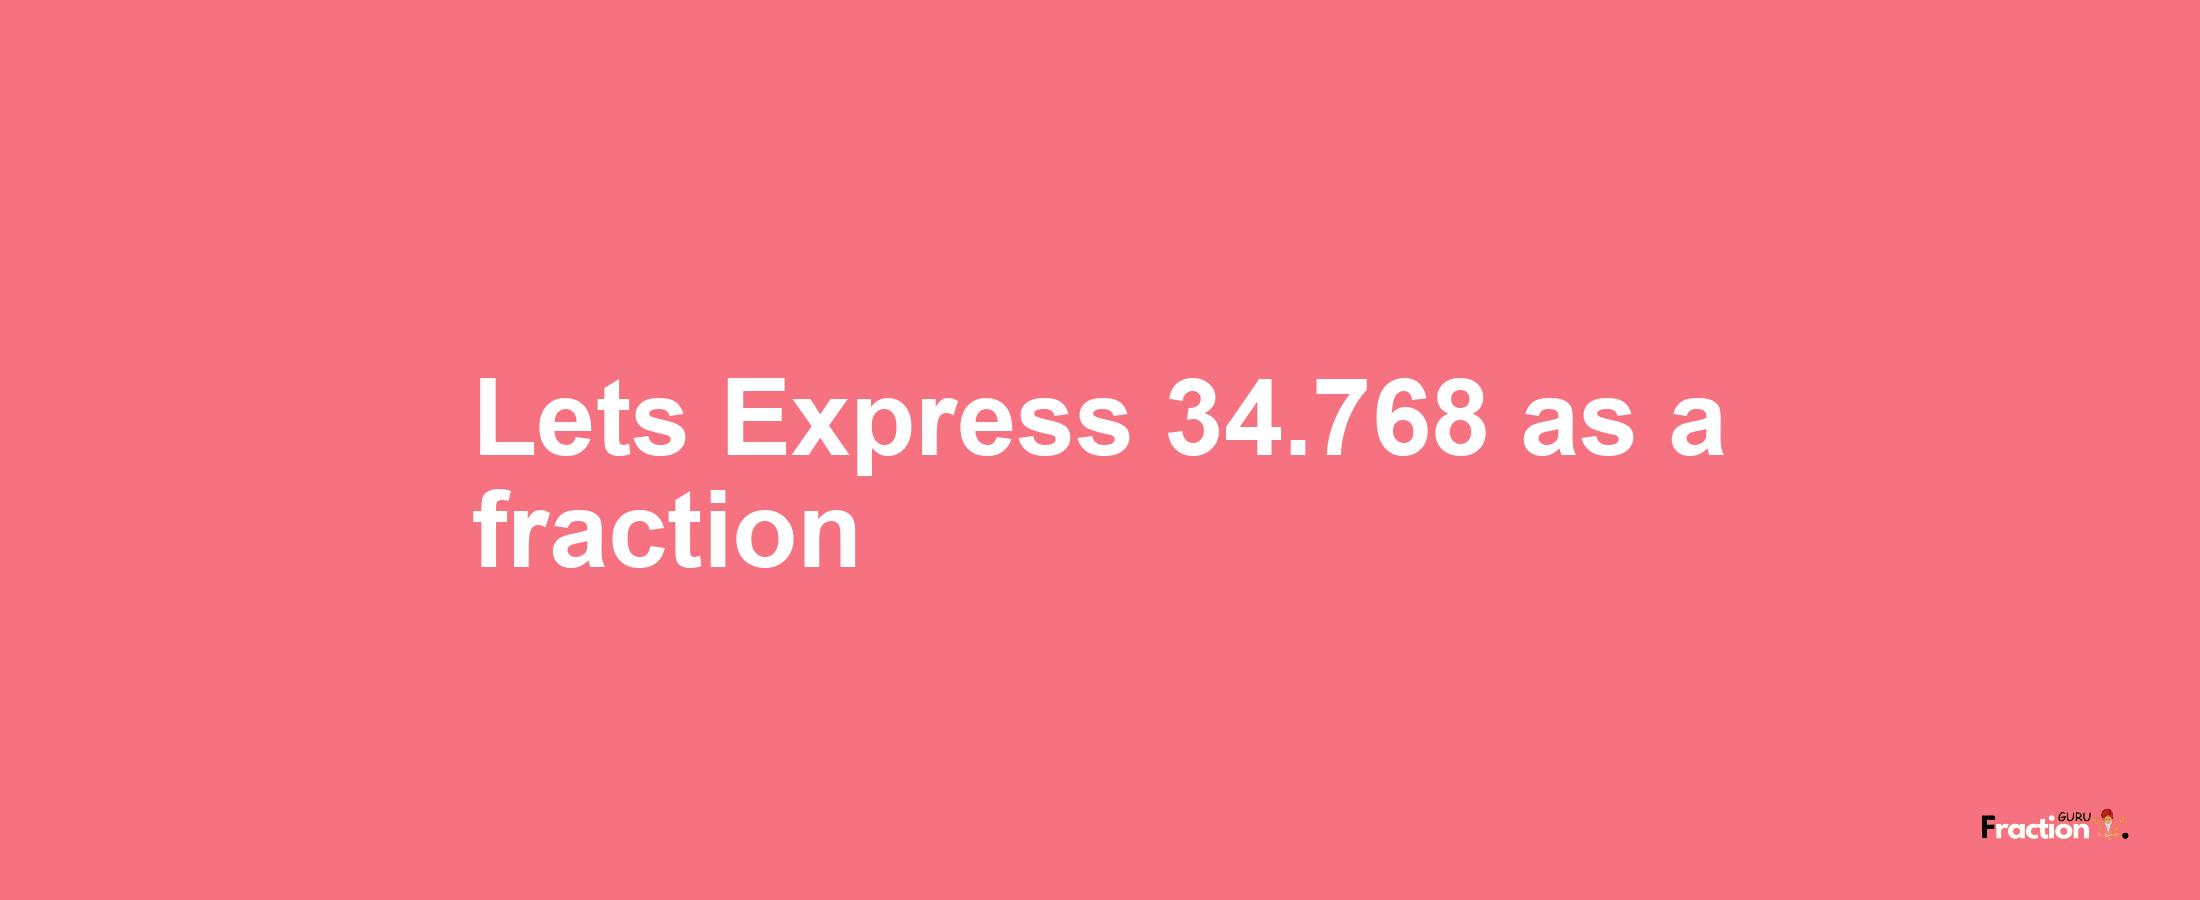 Lets Express 34.768 as afraction